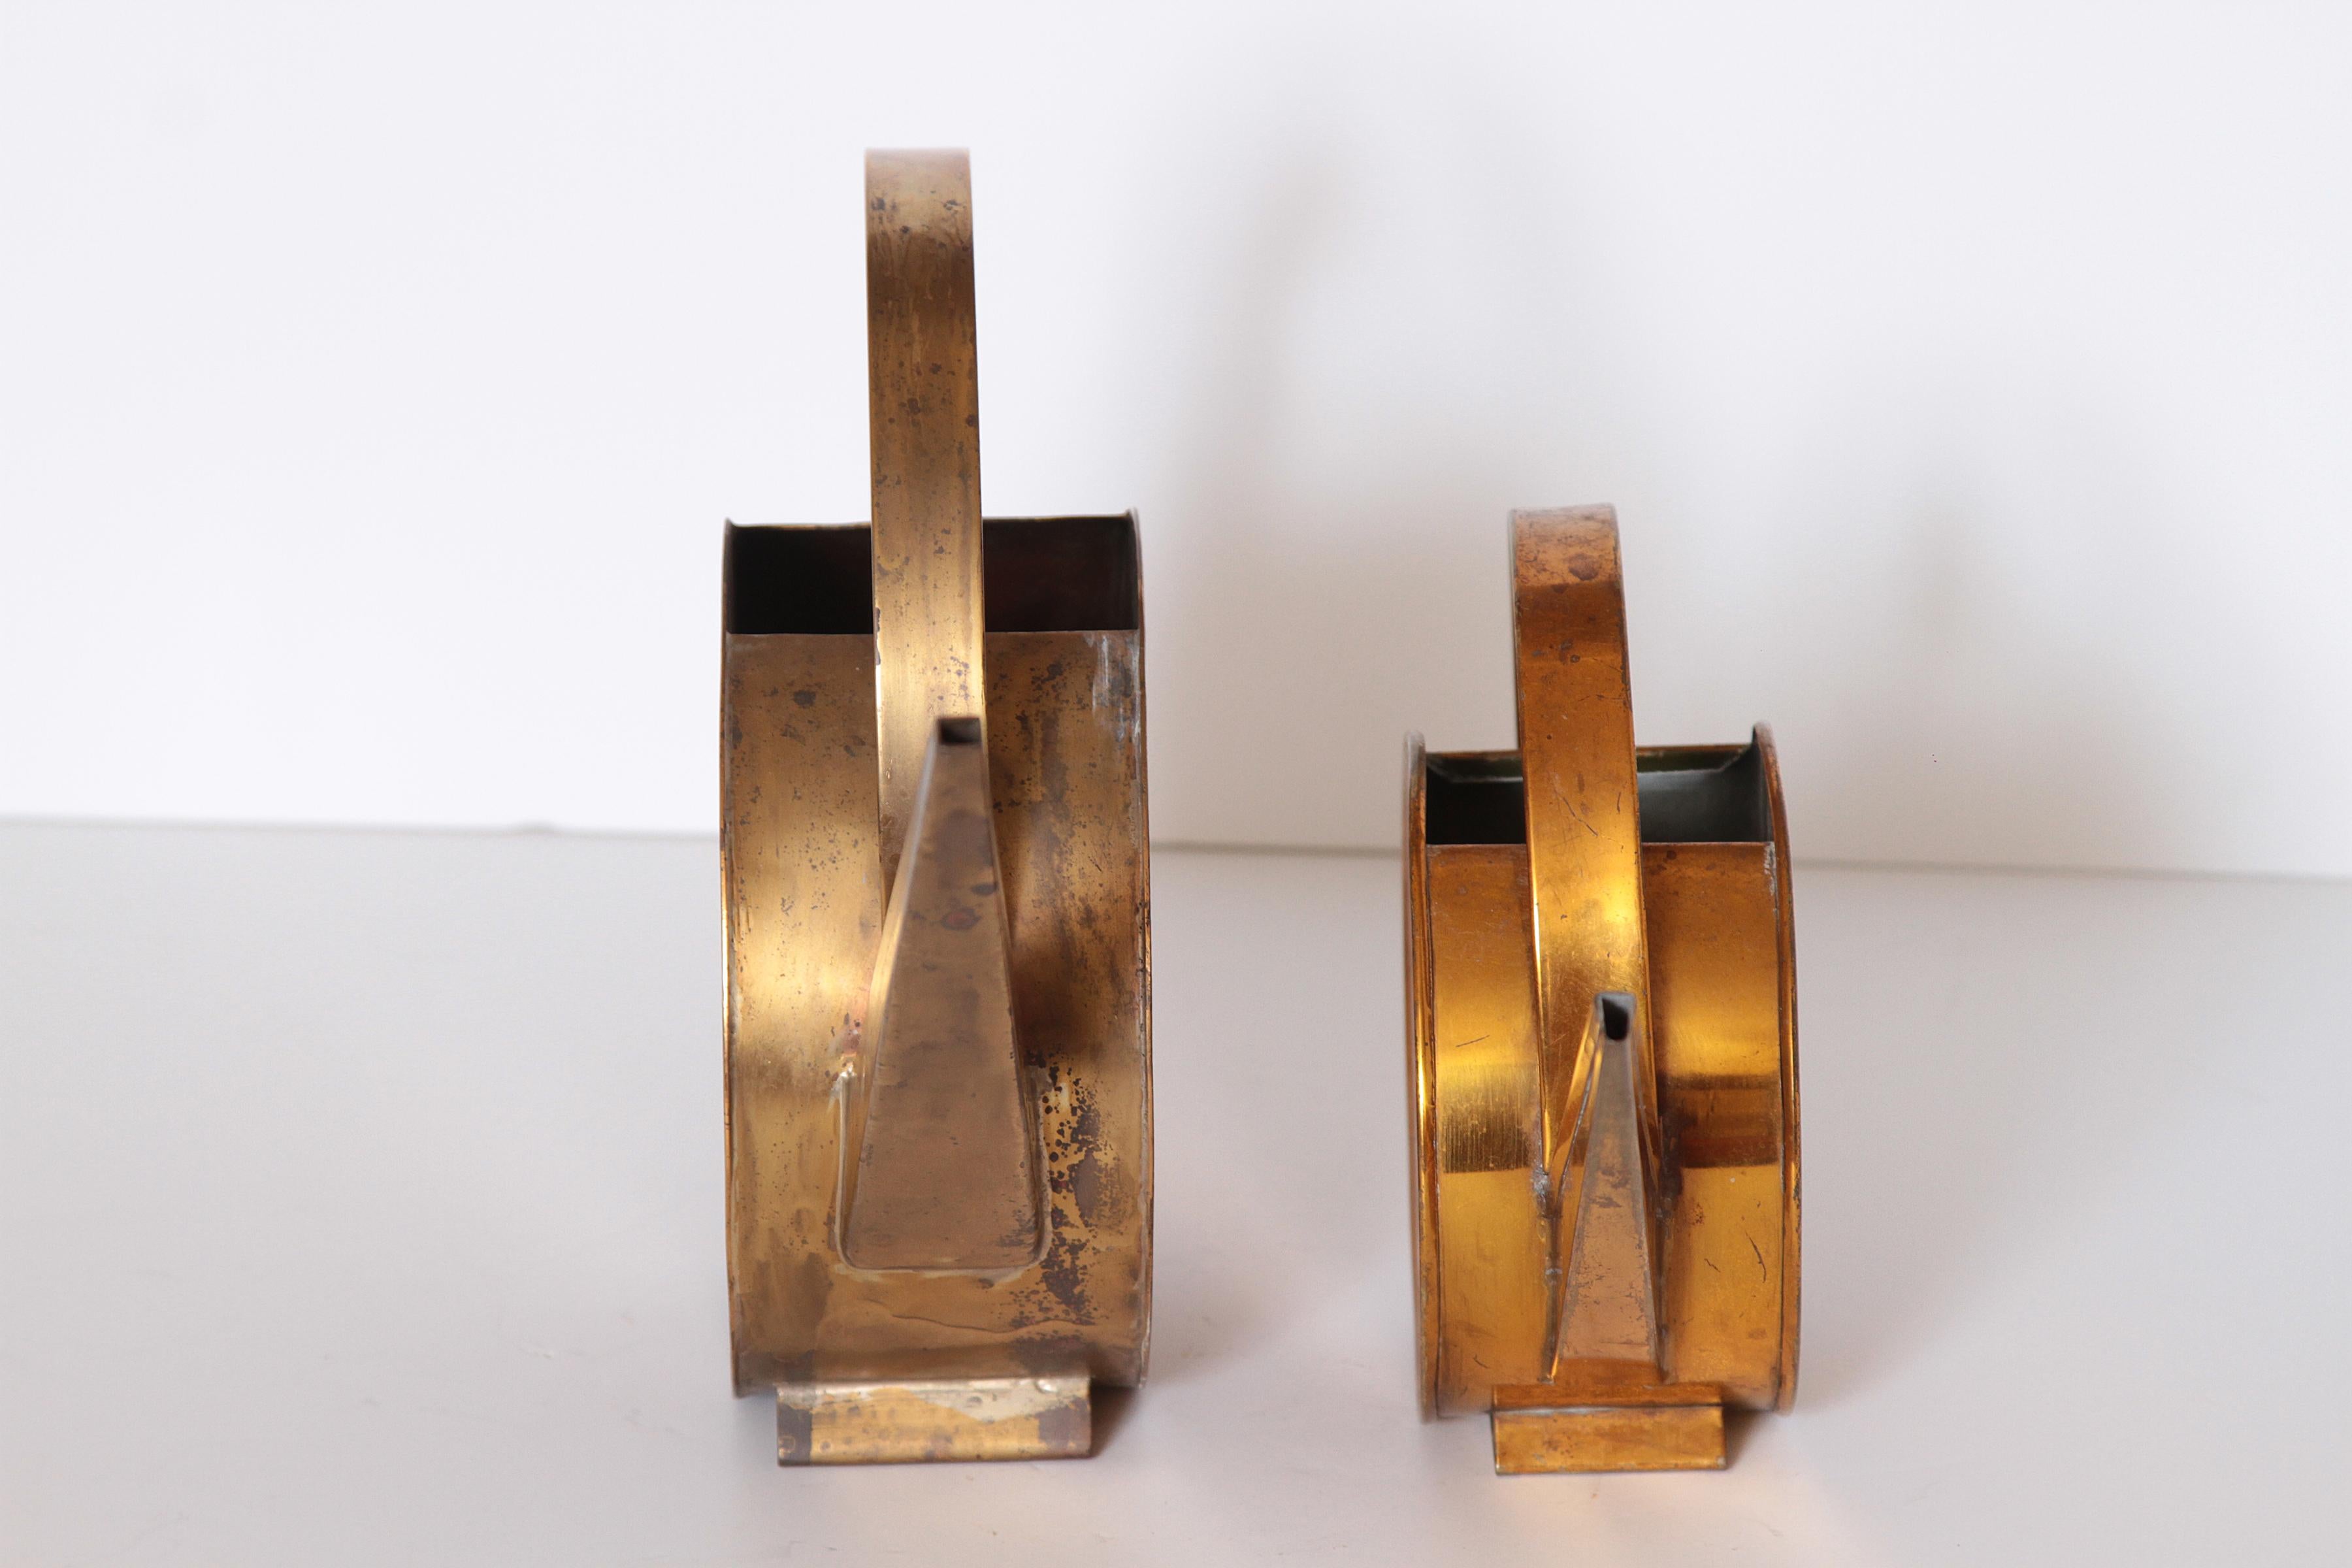 Modernist design 20th century brass watering cans, Bauhaus influenced. 

Very large hand-wrought 20th century brass watering can. Heavy solid brass or plated copper construction. 
Second matching smaller can in more of a plated tin or the like.